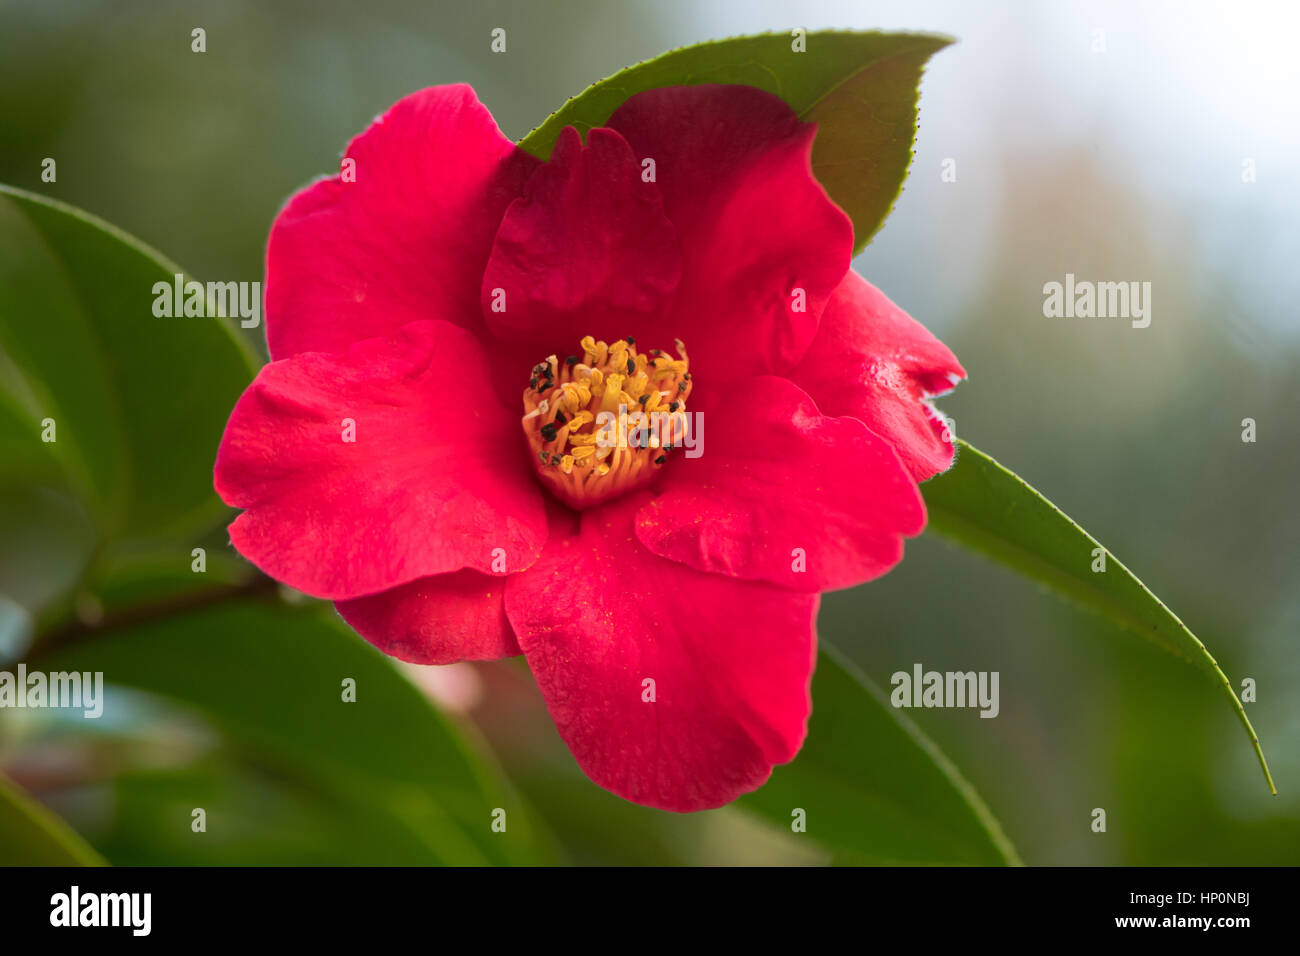 Camellia japonica dark pink flower with yellow stamens Single flower with regular petals, with prominent display of stamens and pistils Stock Photo